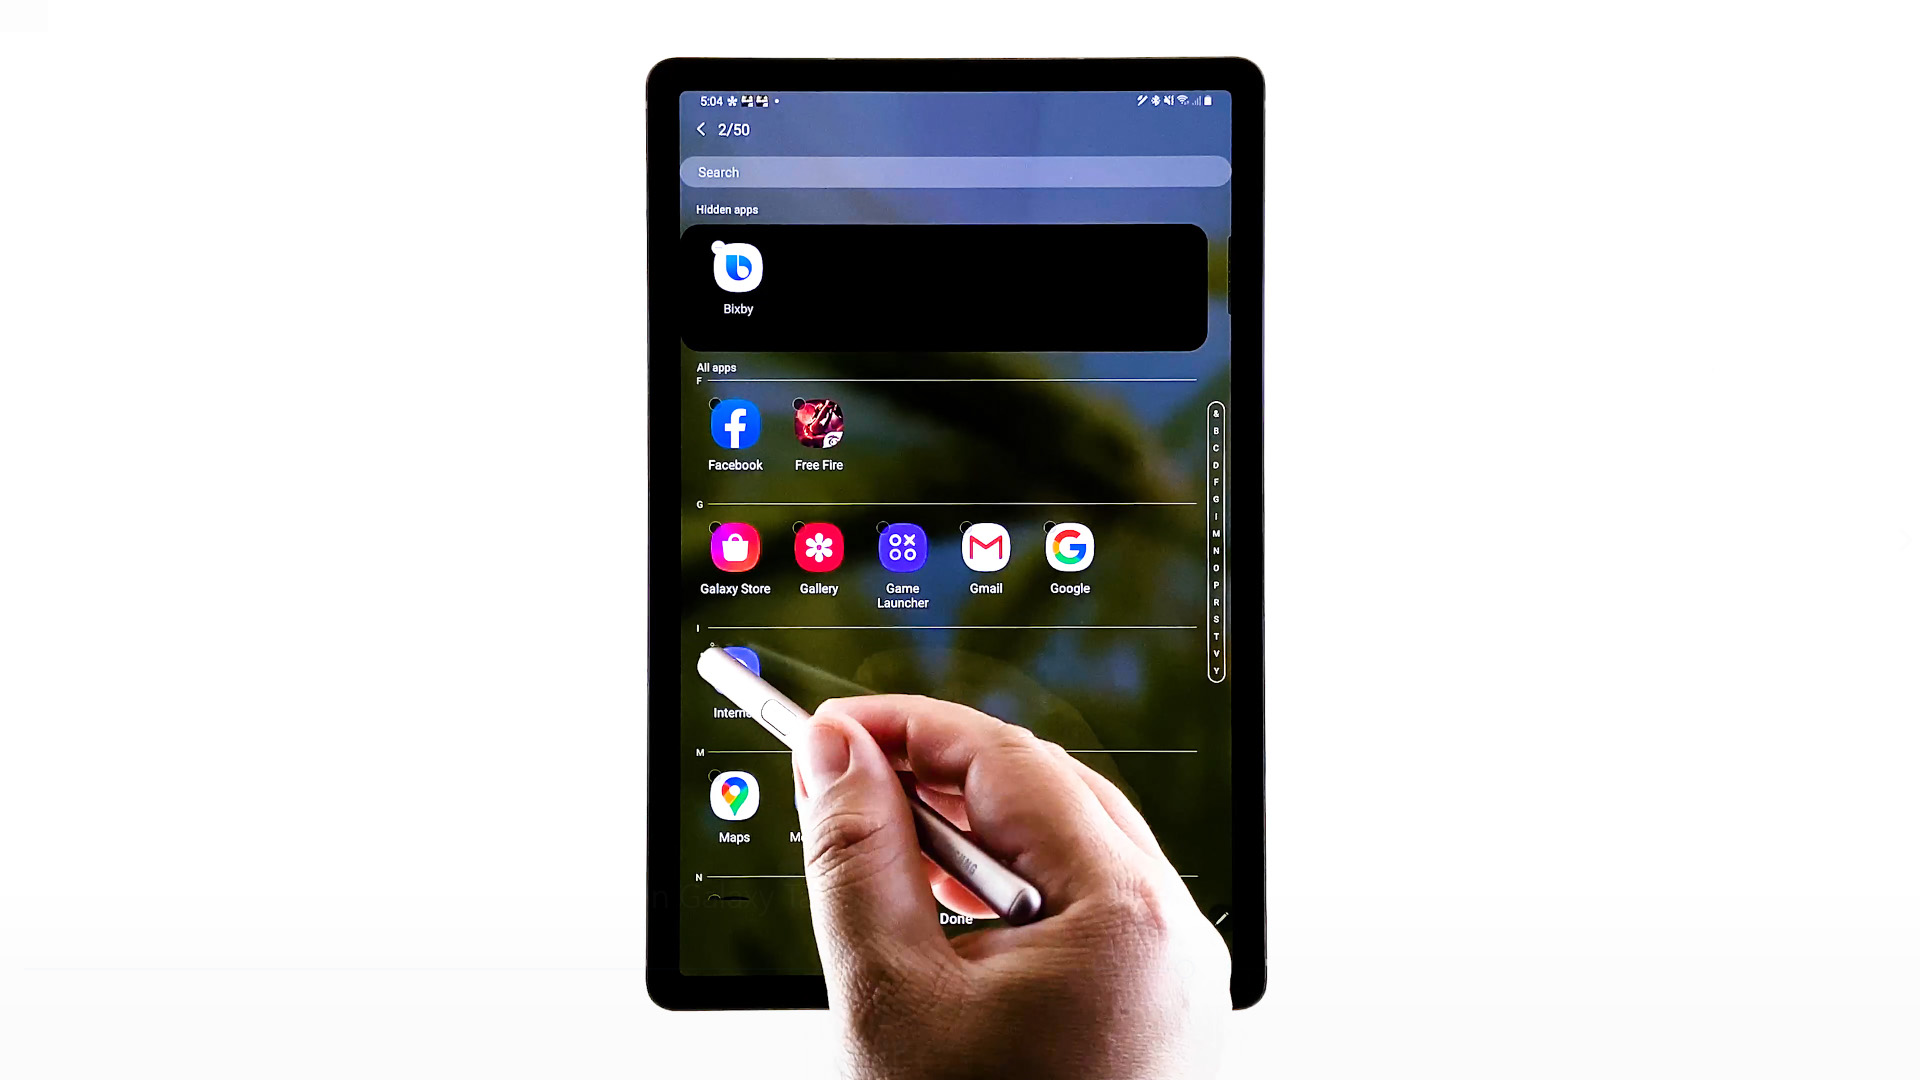 hide apps from tab s6 home screen - select